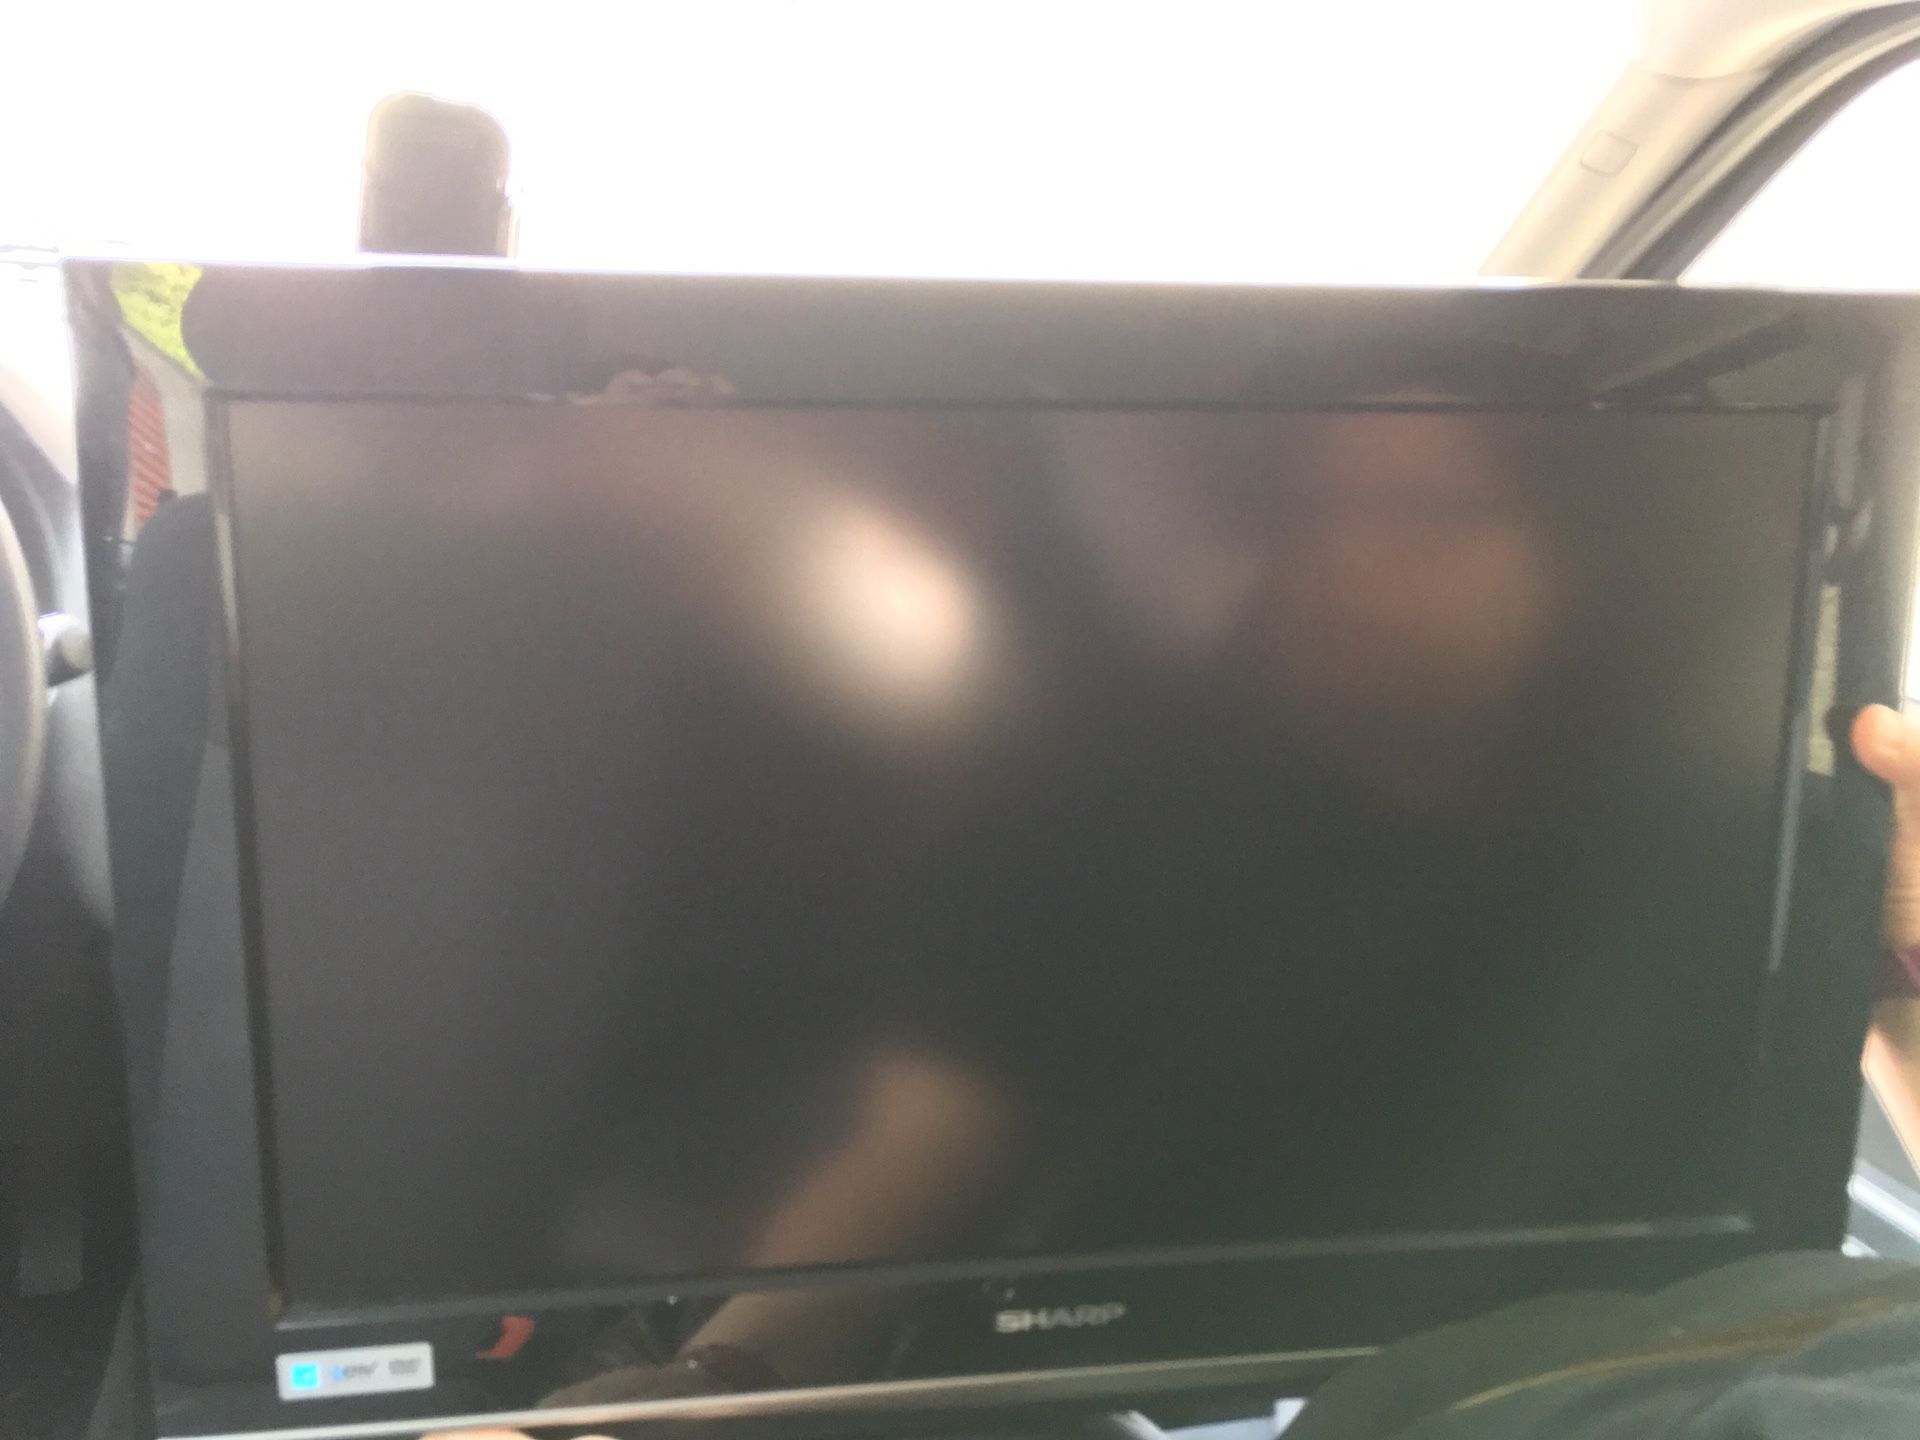 27” Sharp TV perfect for RV, travel trailer, extra bedroom, hook up to game consoles, etc